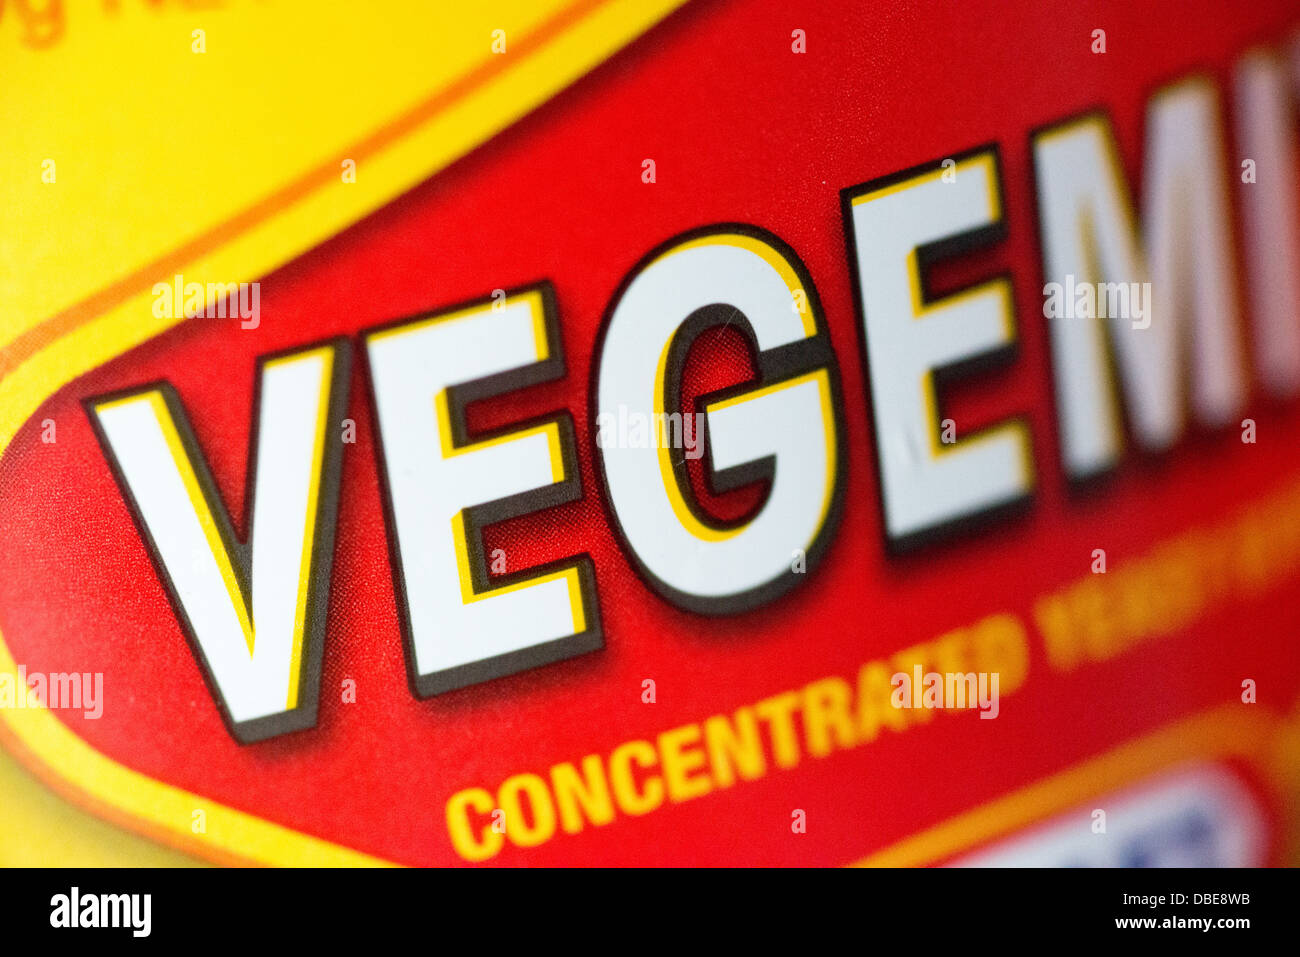 Close-up of the label on a jar of Vegemite, a famous Australian spread made from concentrated yeast extract. Vegemite is now owned by the American food company Kraft. Stock Photo